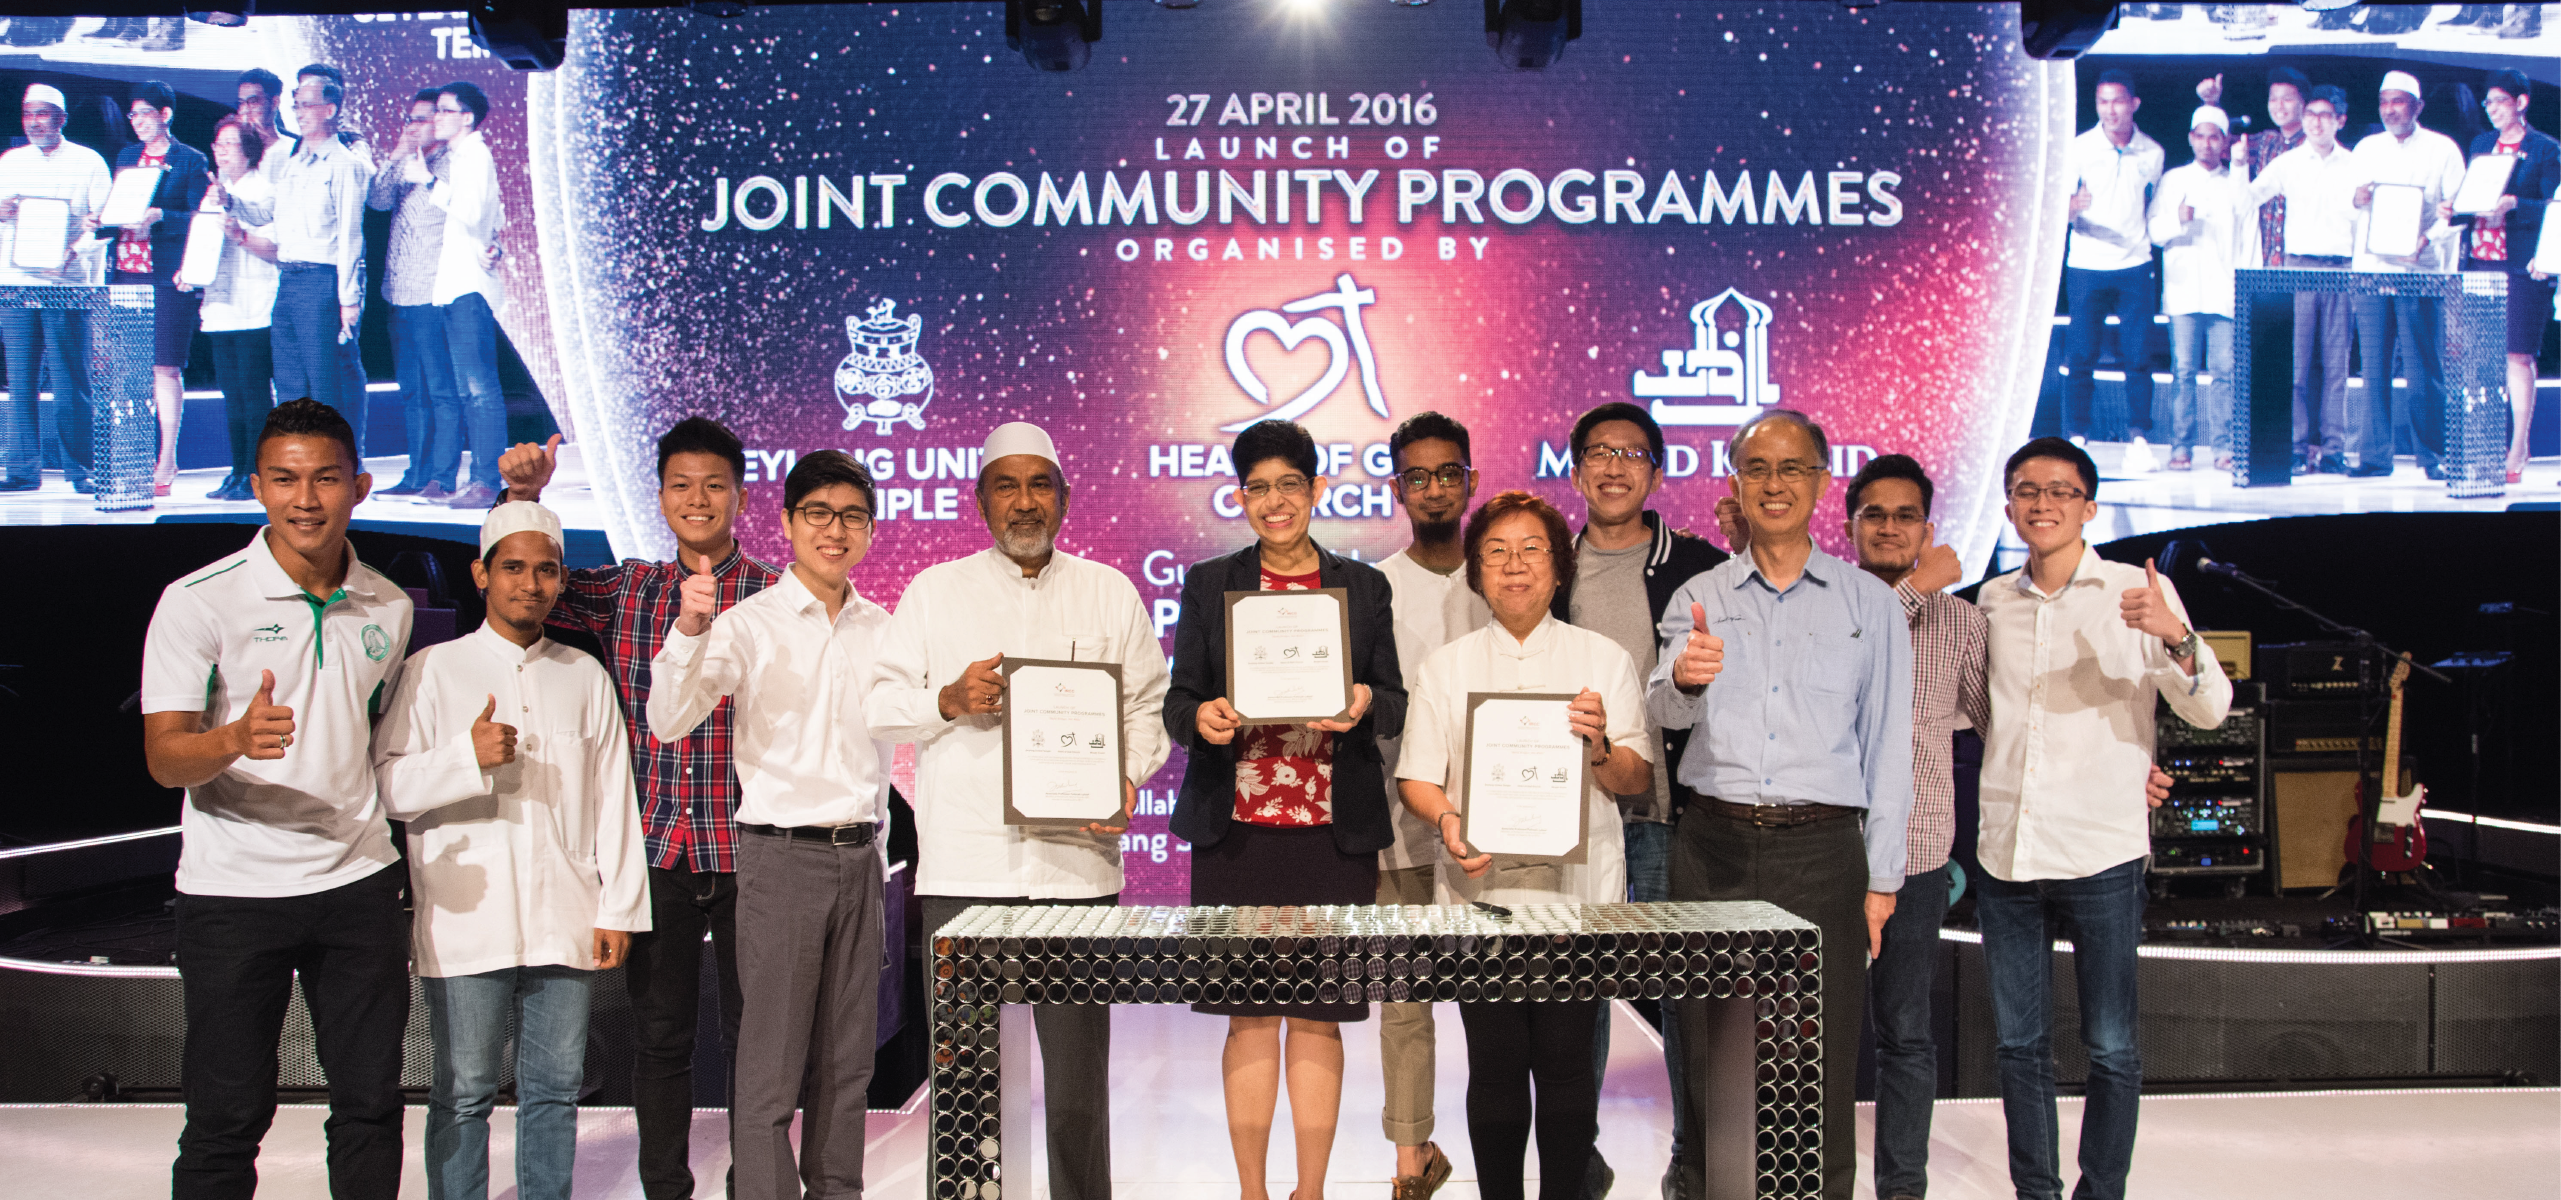 Dr Fatimah Lateef at the launch of the Joint Community Programmes for Geylang Serai IRCC ar Heart of God Church (Singapore)